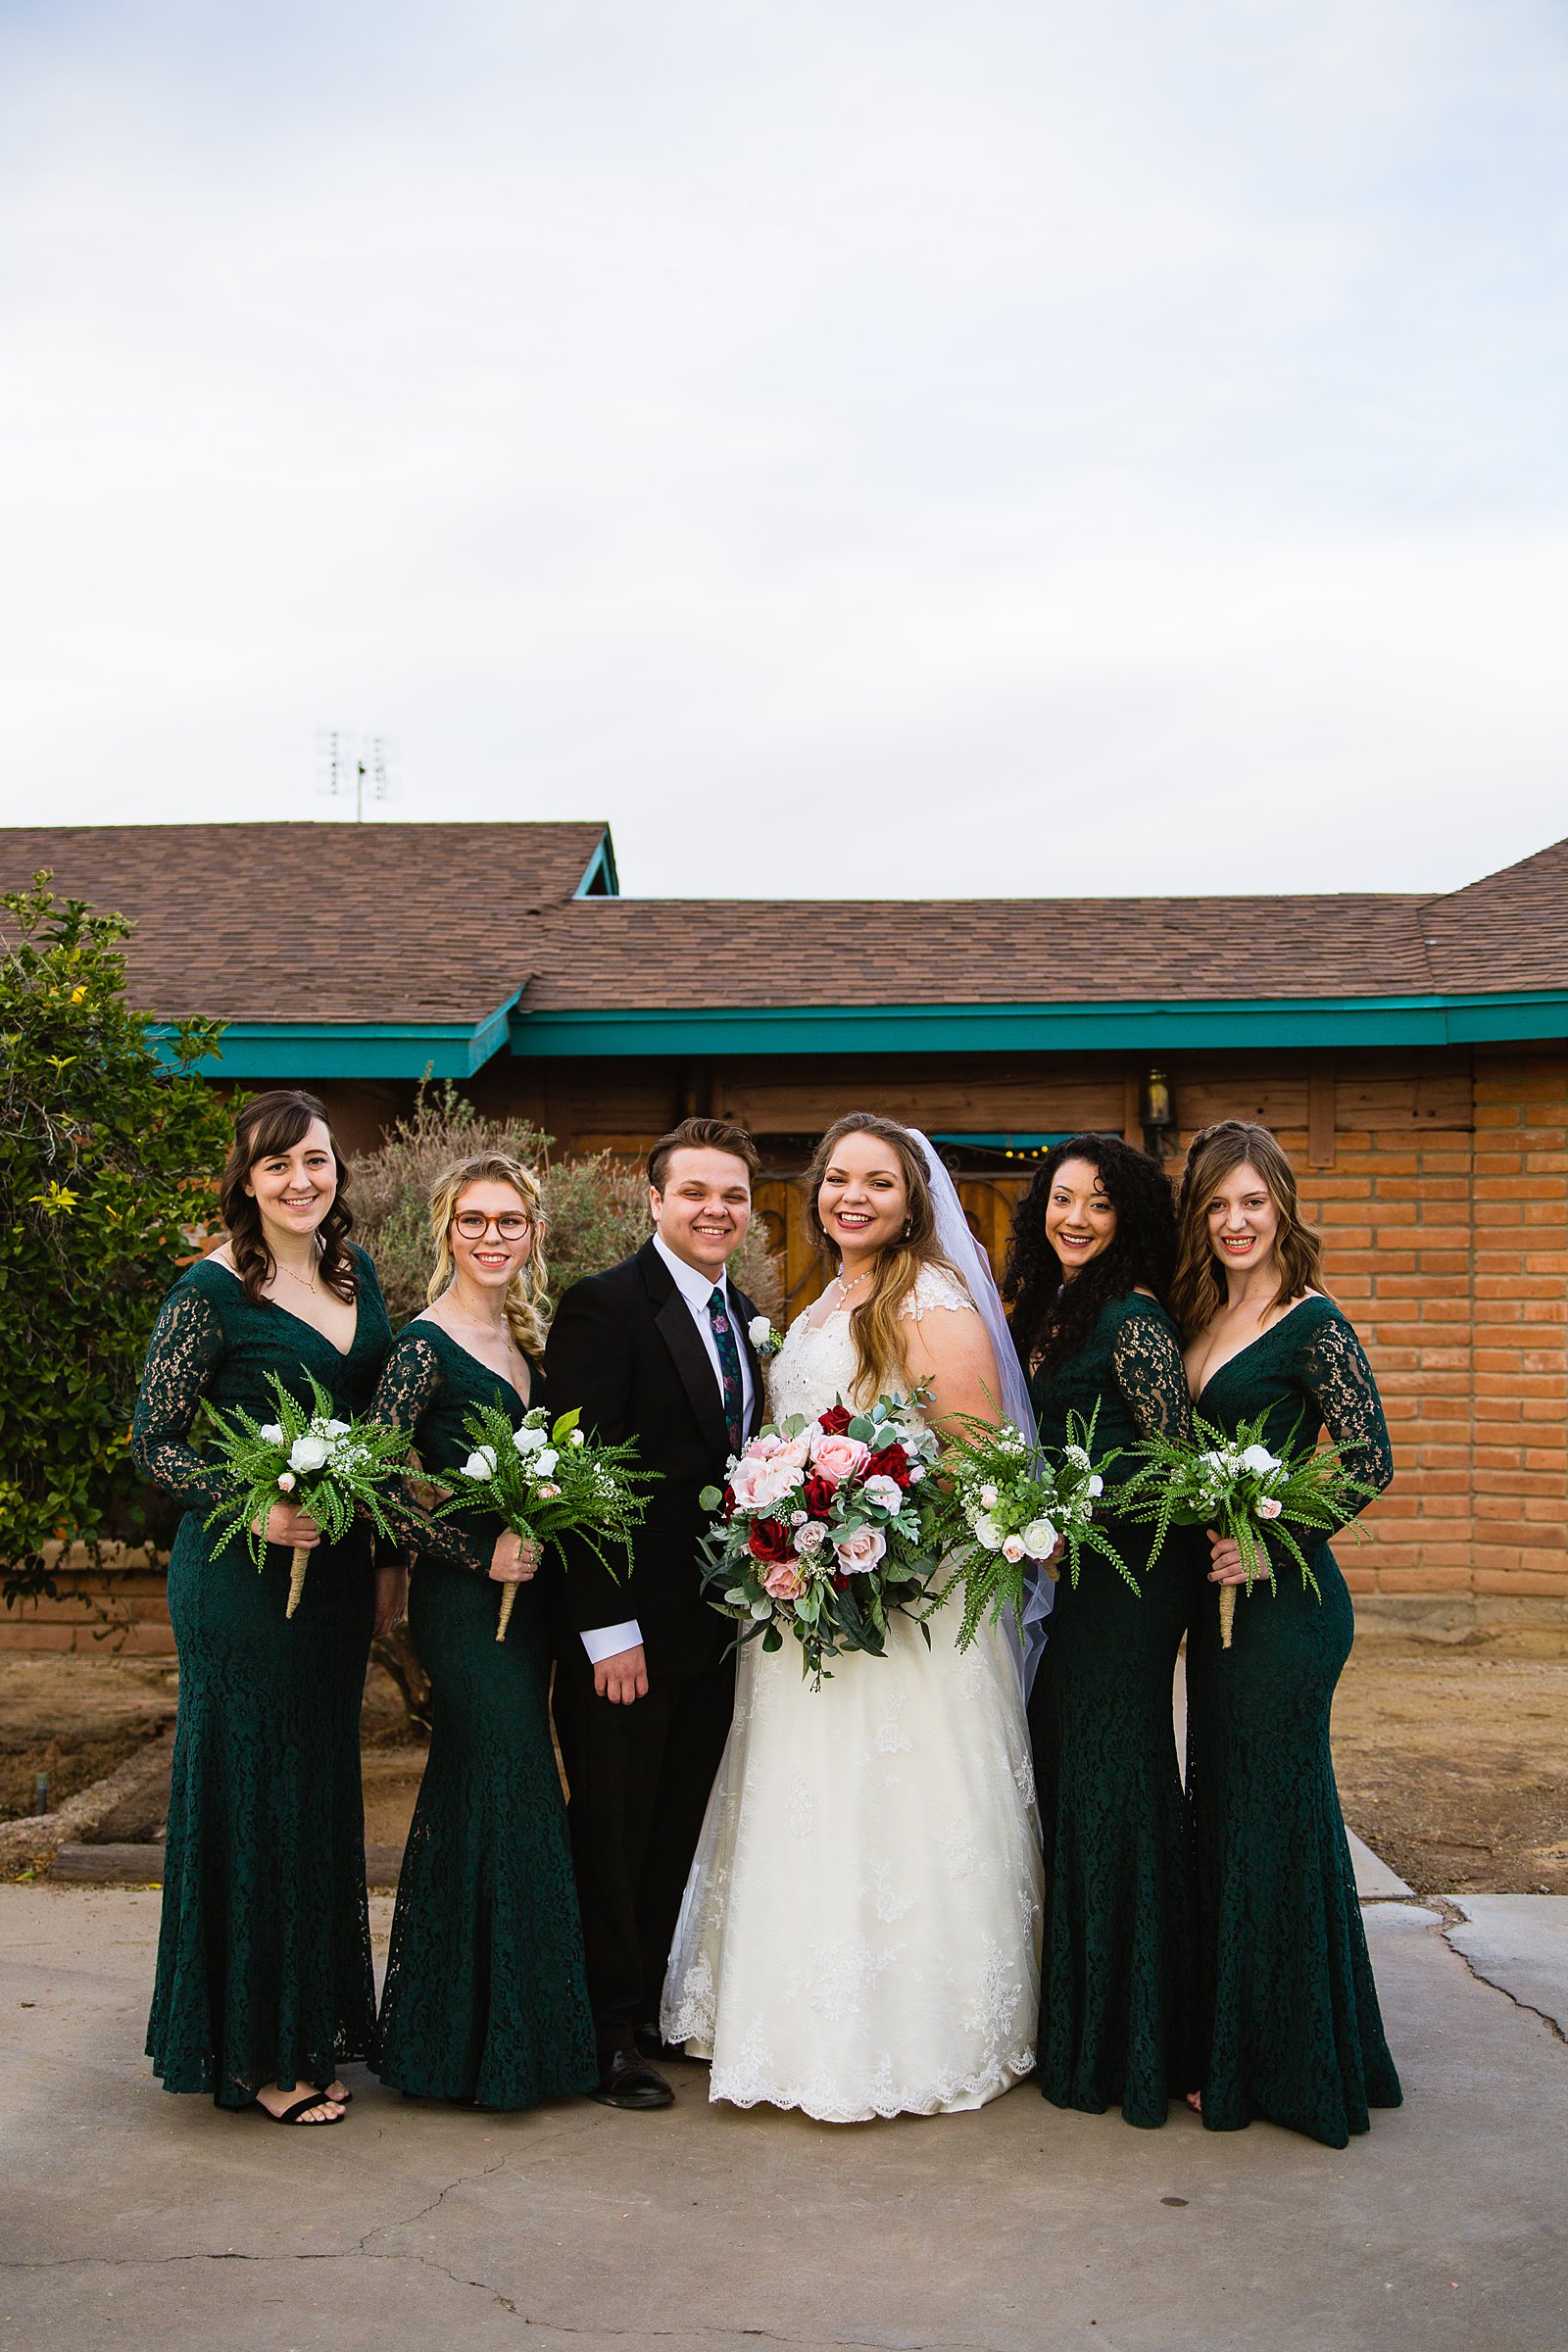 Bride and mixed gender bridal party together at a Backyard wedding by Arizona wedding photographer PMA Photography.